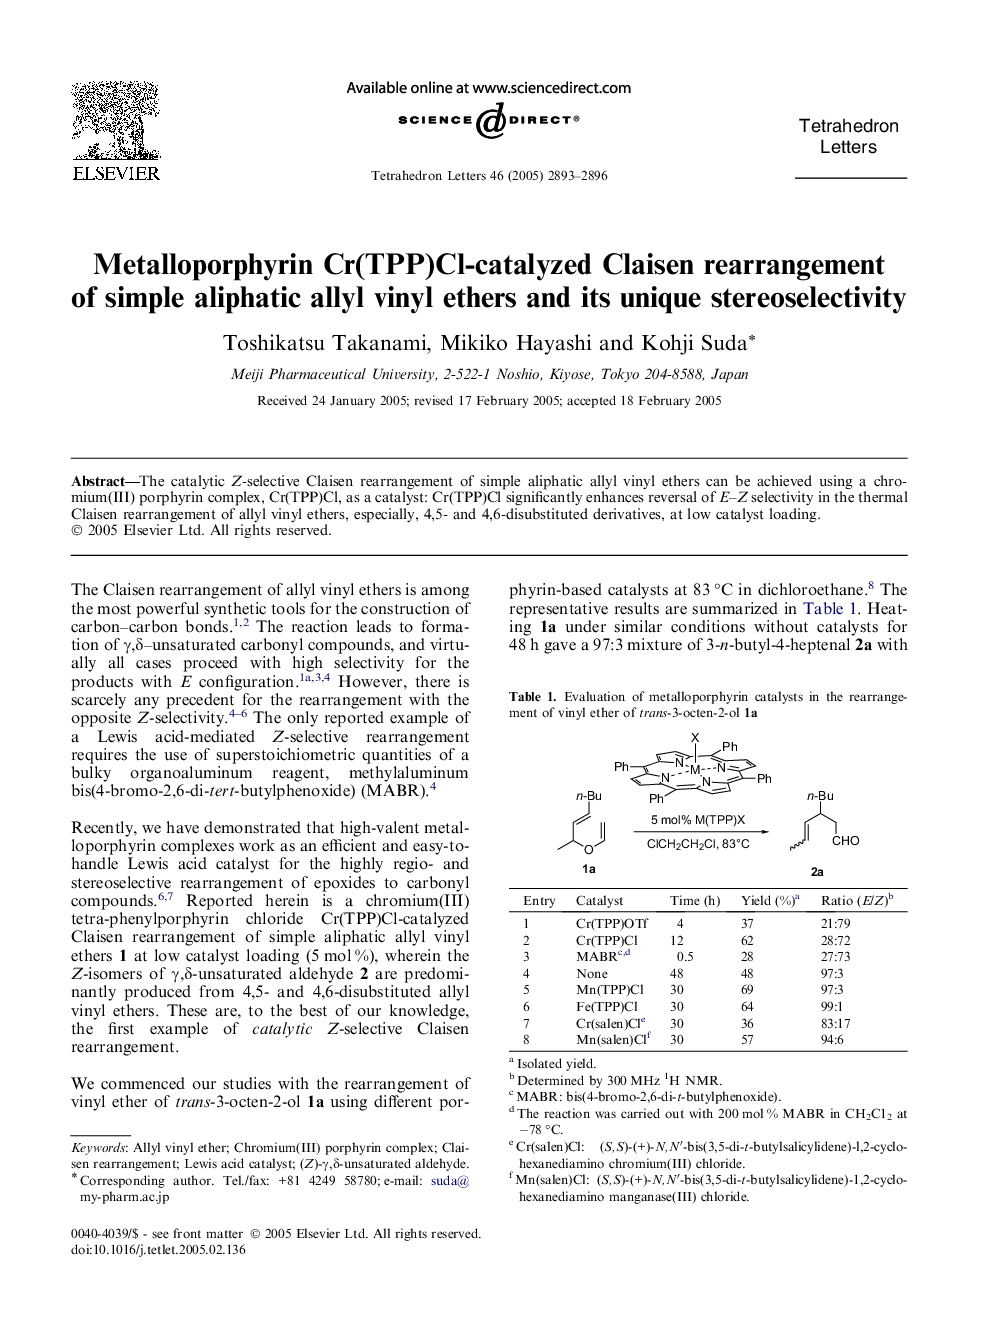 Metalloporphyrin Cr(TPP)Cl-catalyzed Claisen rearrangement of simple aliphatic allyl vinyl ethers and its unique stereoselectivity